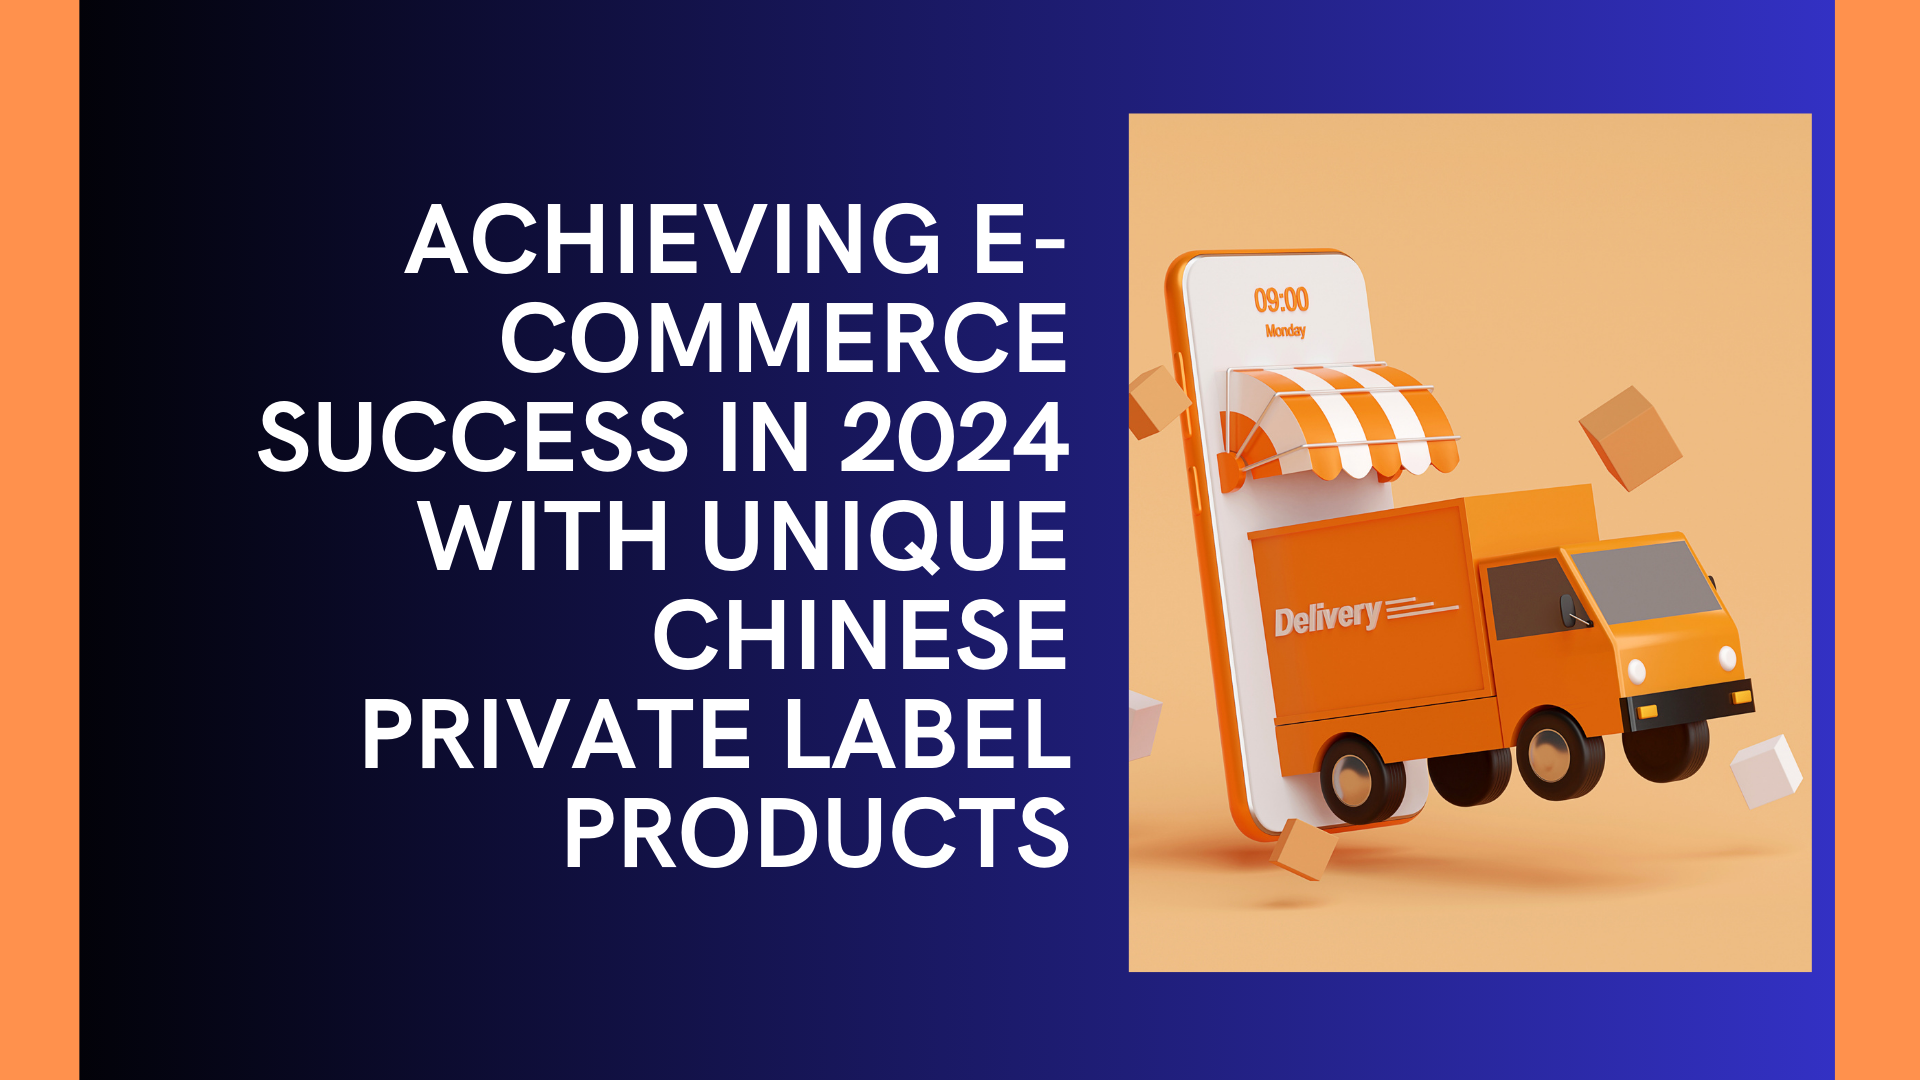 Achieving E-commerce Success in 2024 with Unique Chinese Private Label Products